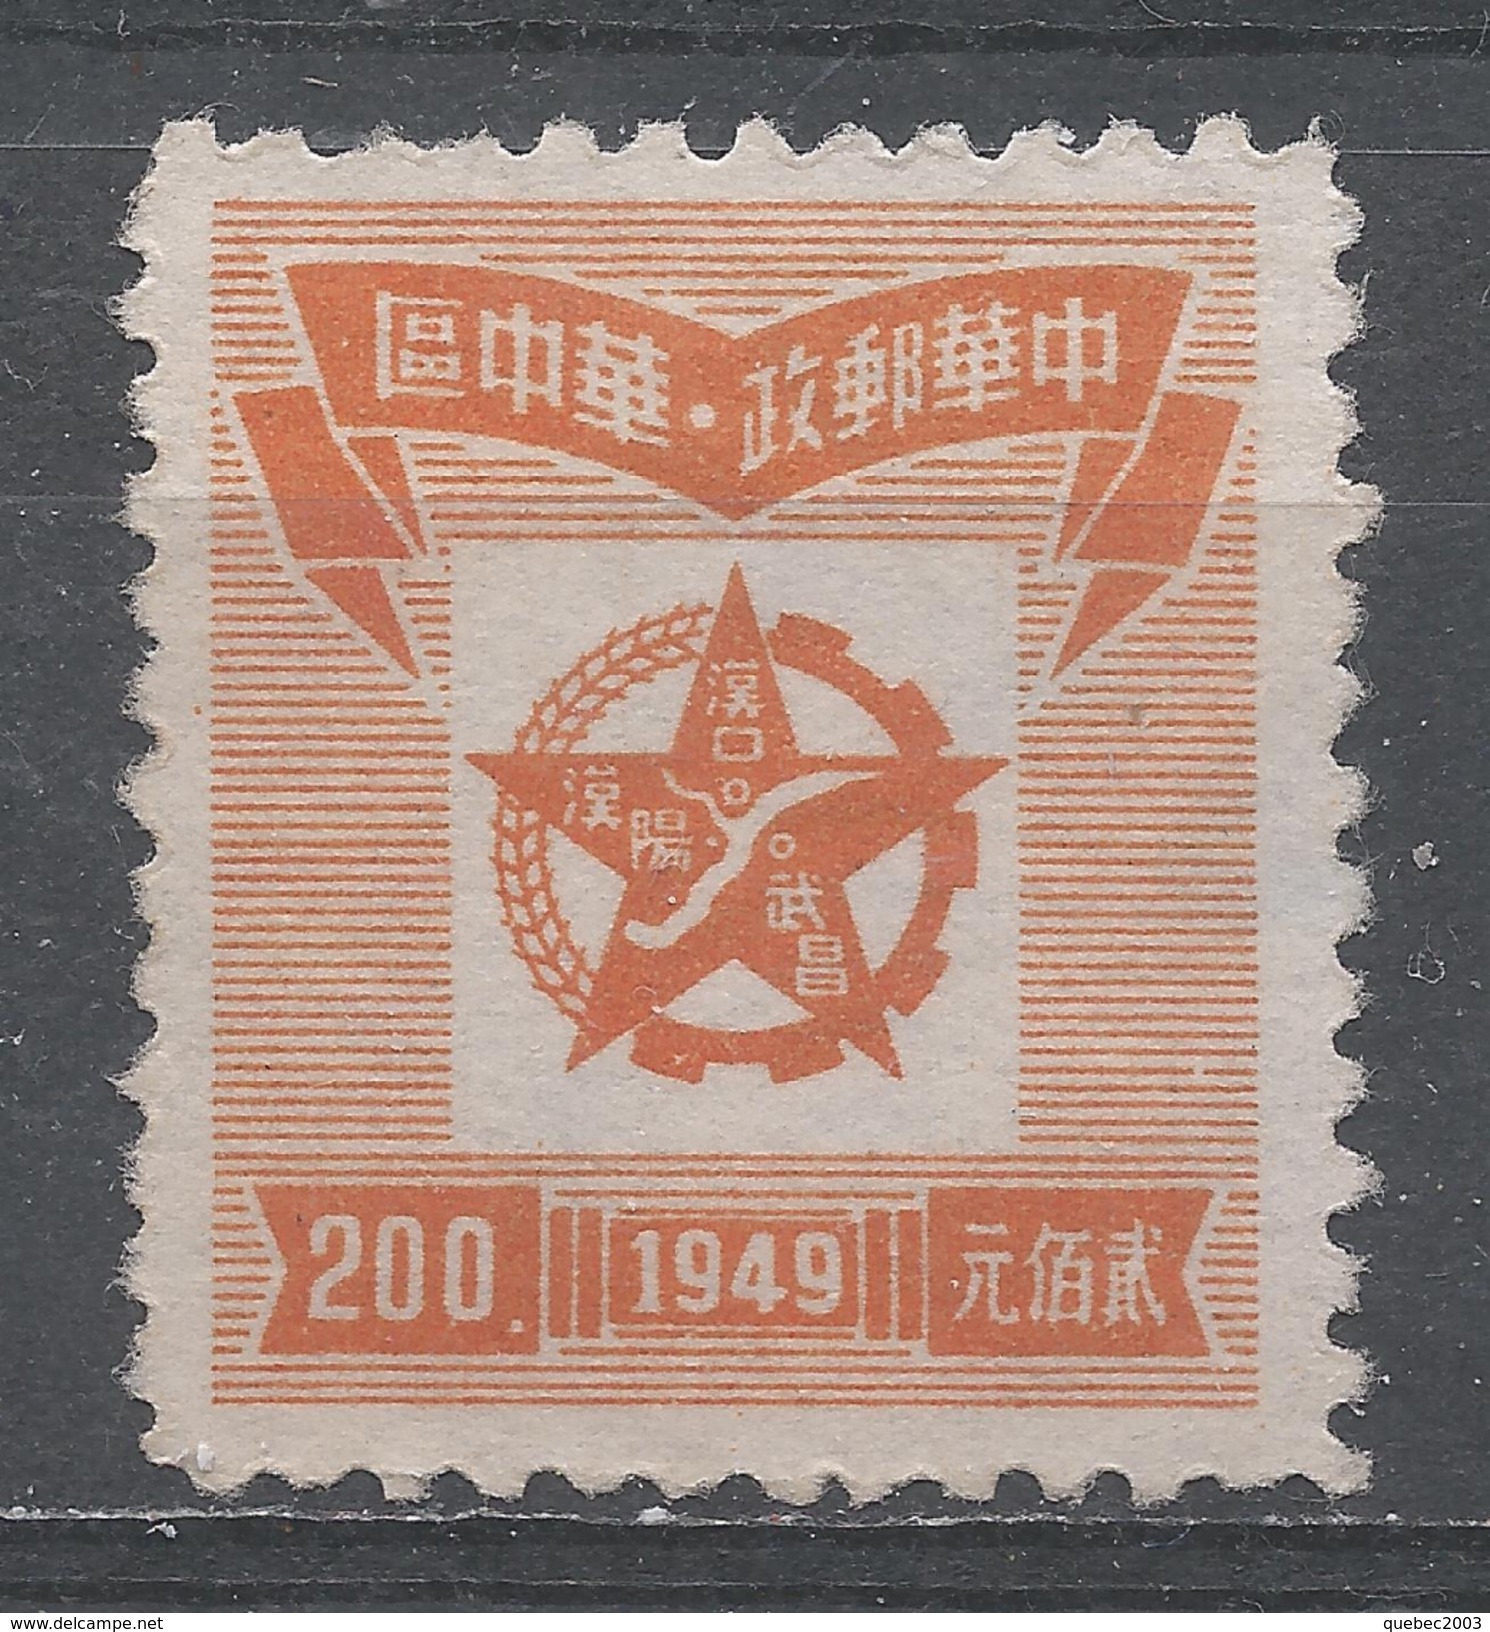 People's Republic Of China, Central 1949. Scott #6L50 (MNH) Star Enclosing Map Of Hankow Area - Central China 1948-49